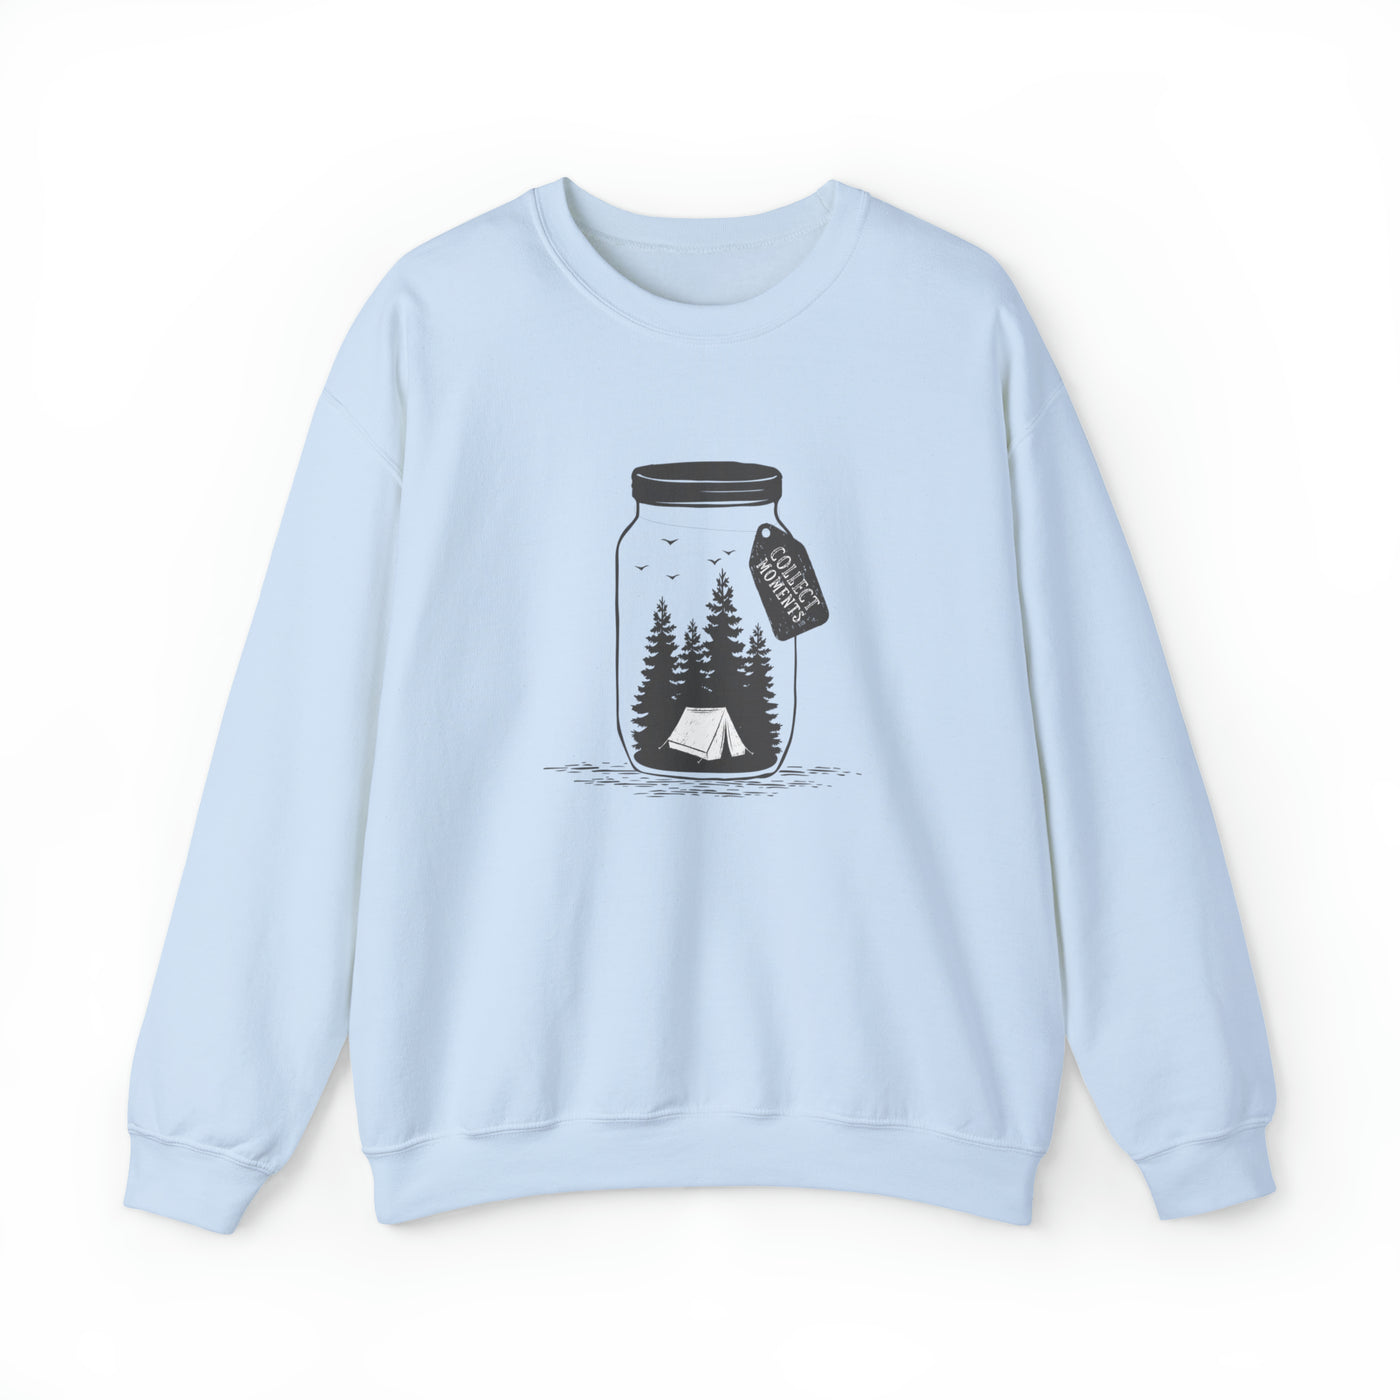 Collect Moments Not Things Crewneck Sweatshirt